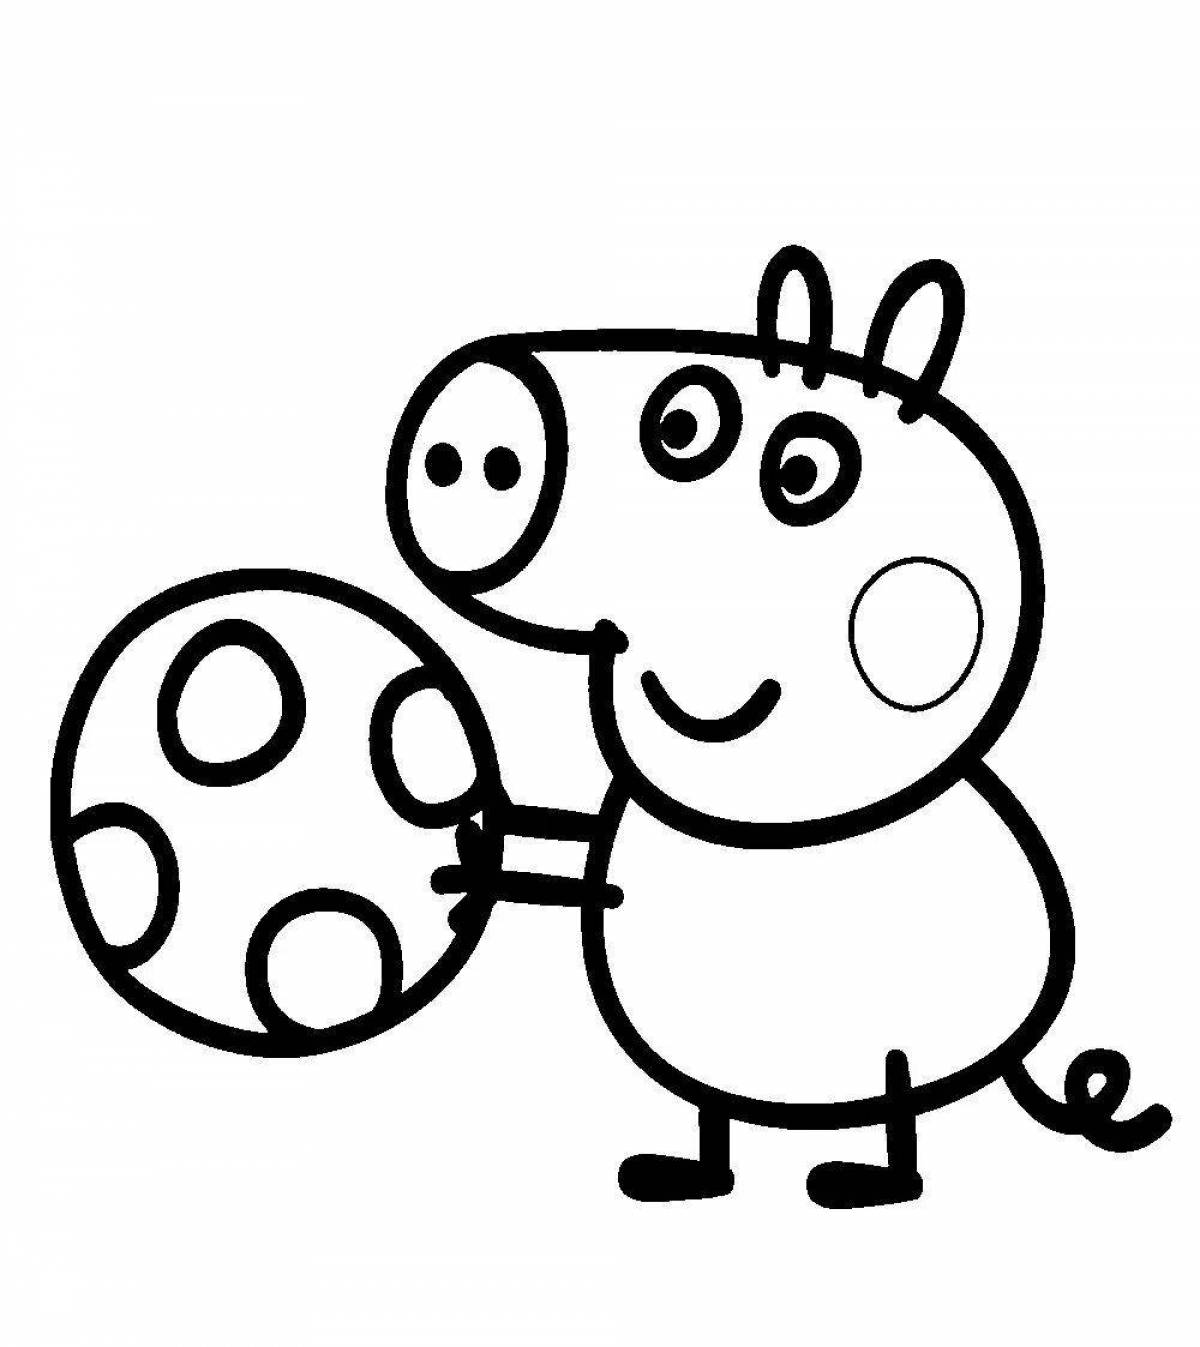 Fun Peppa Pig coloring book for little ones